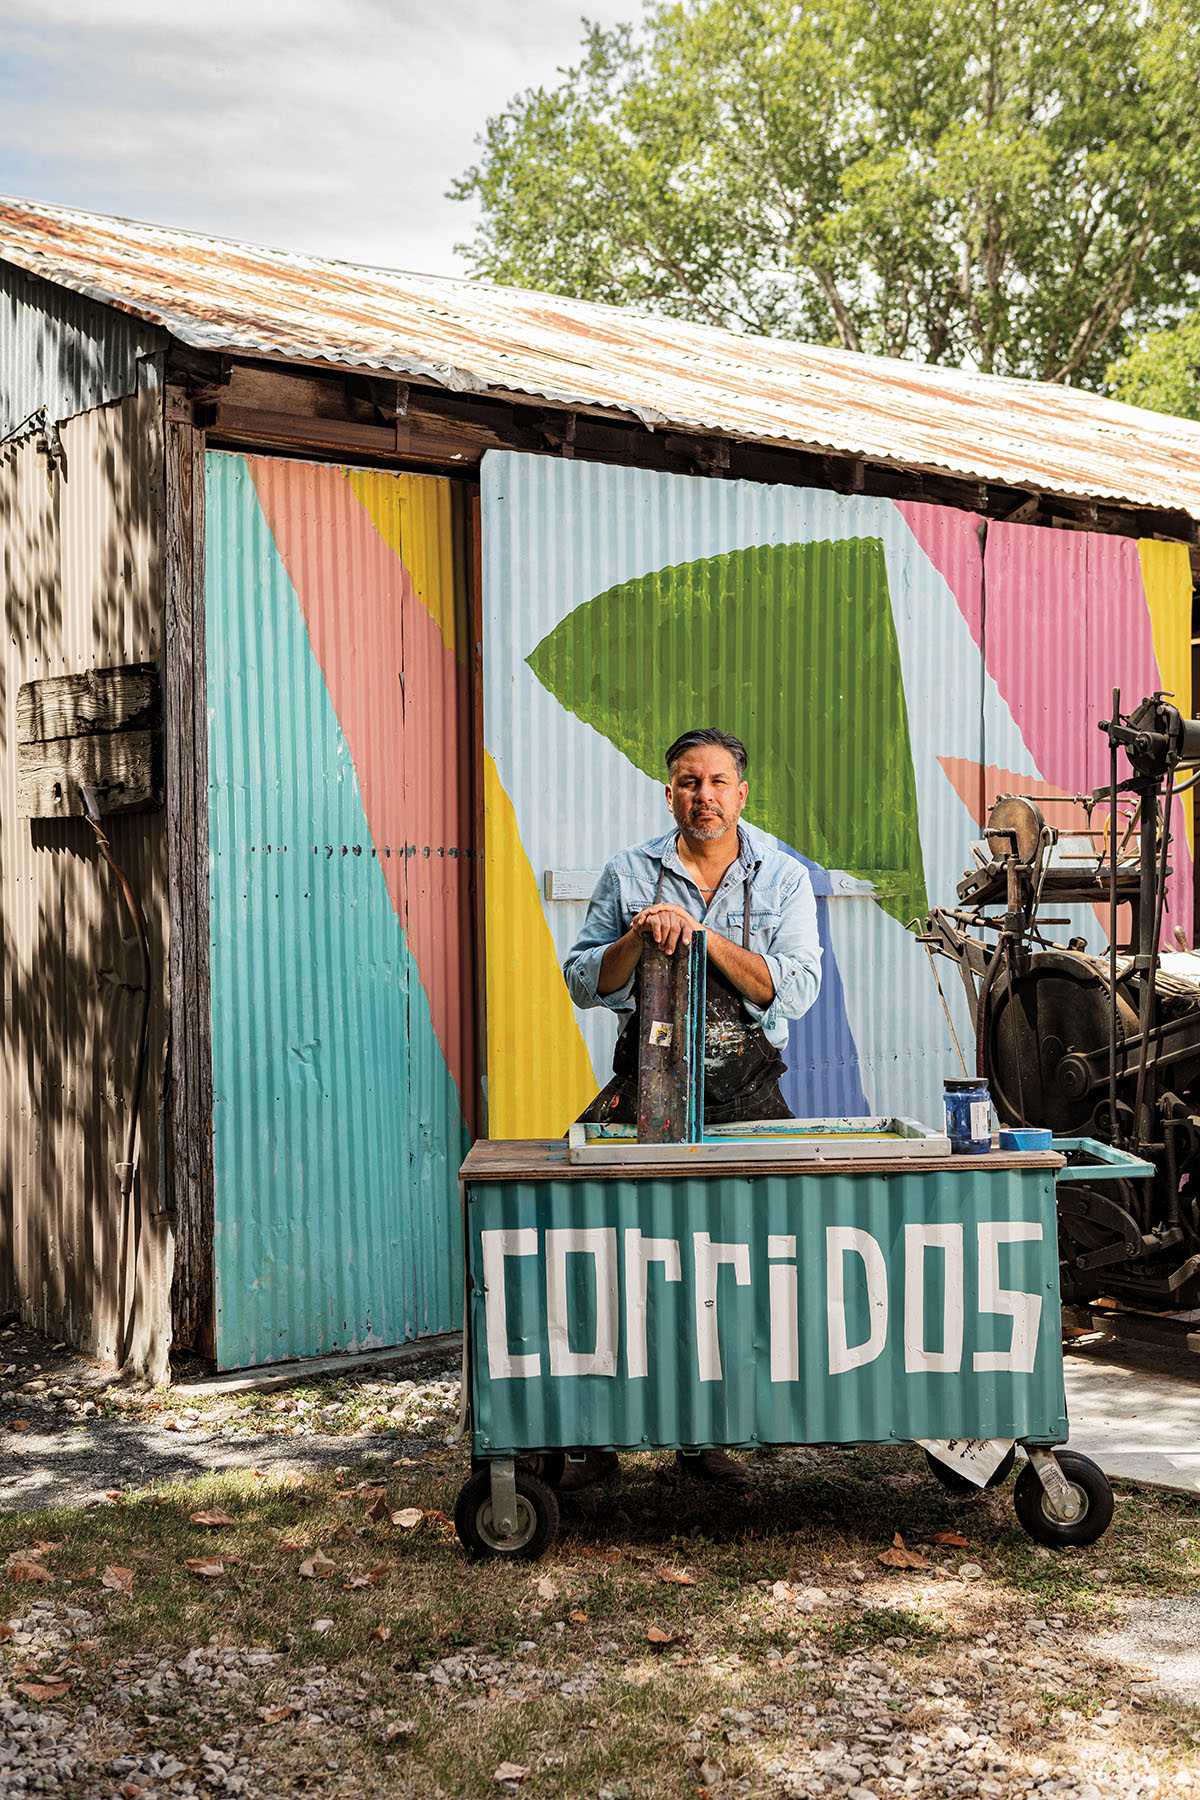 A man stands behind a teal metal sign reading "Corridos"